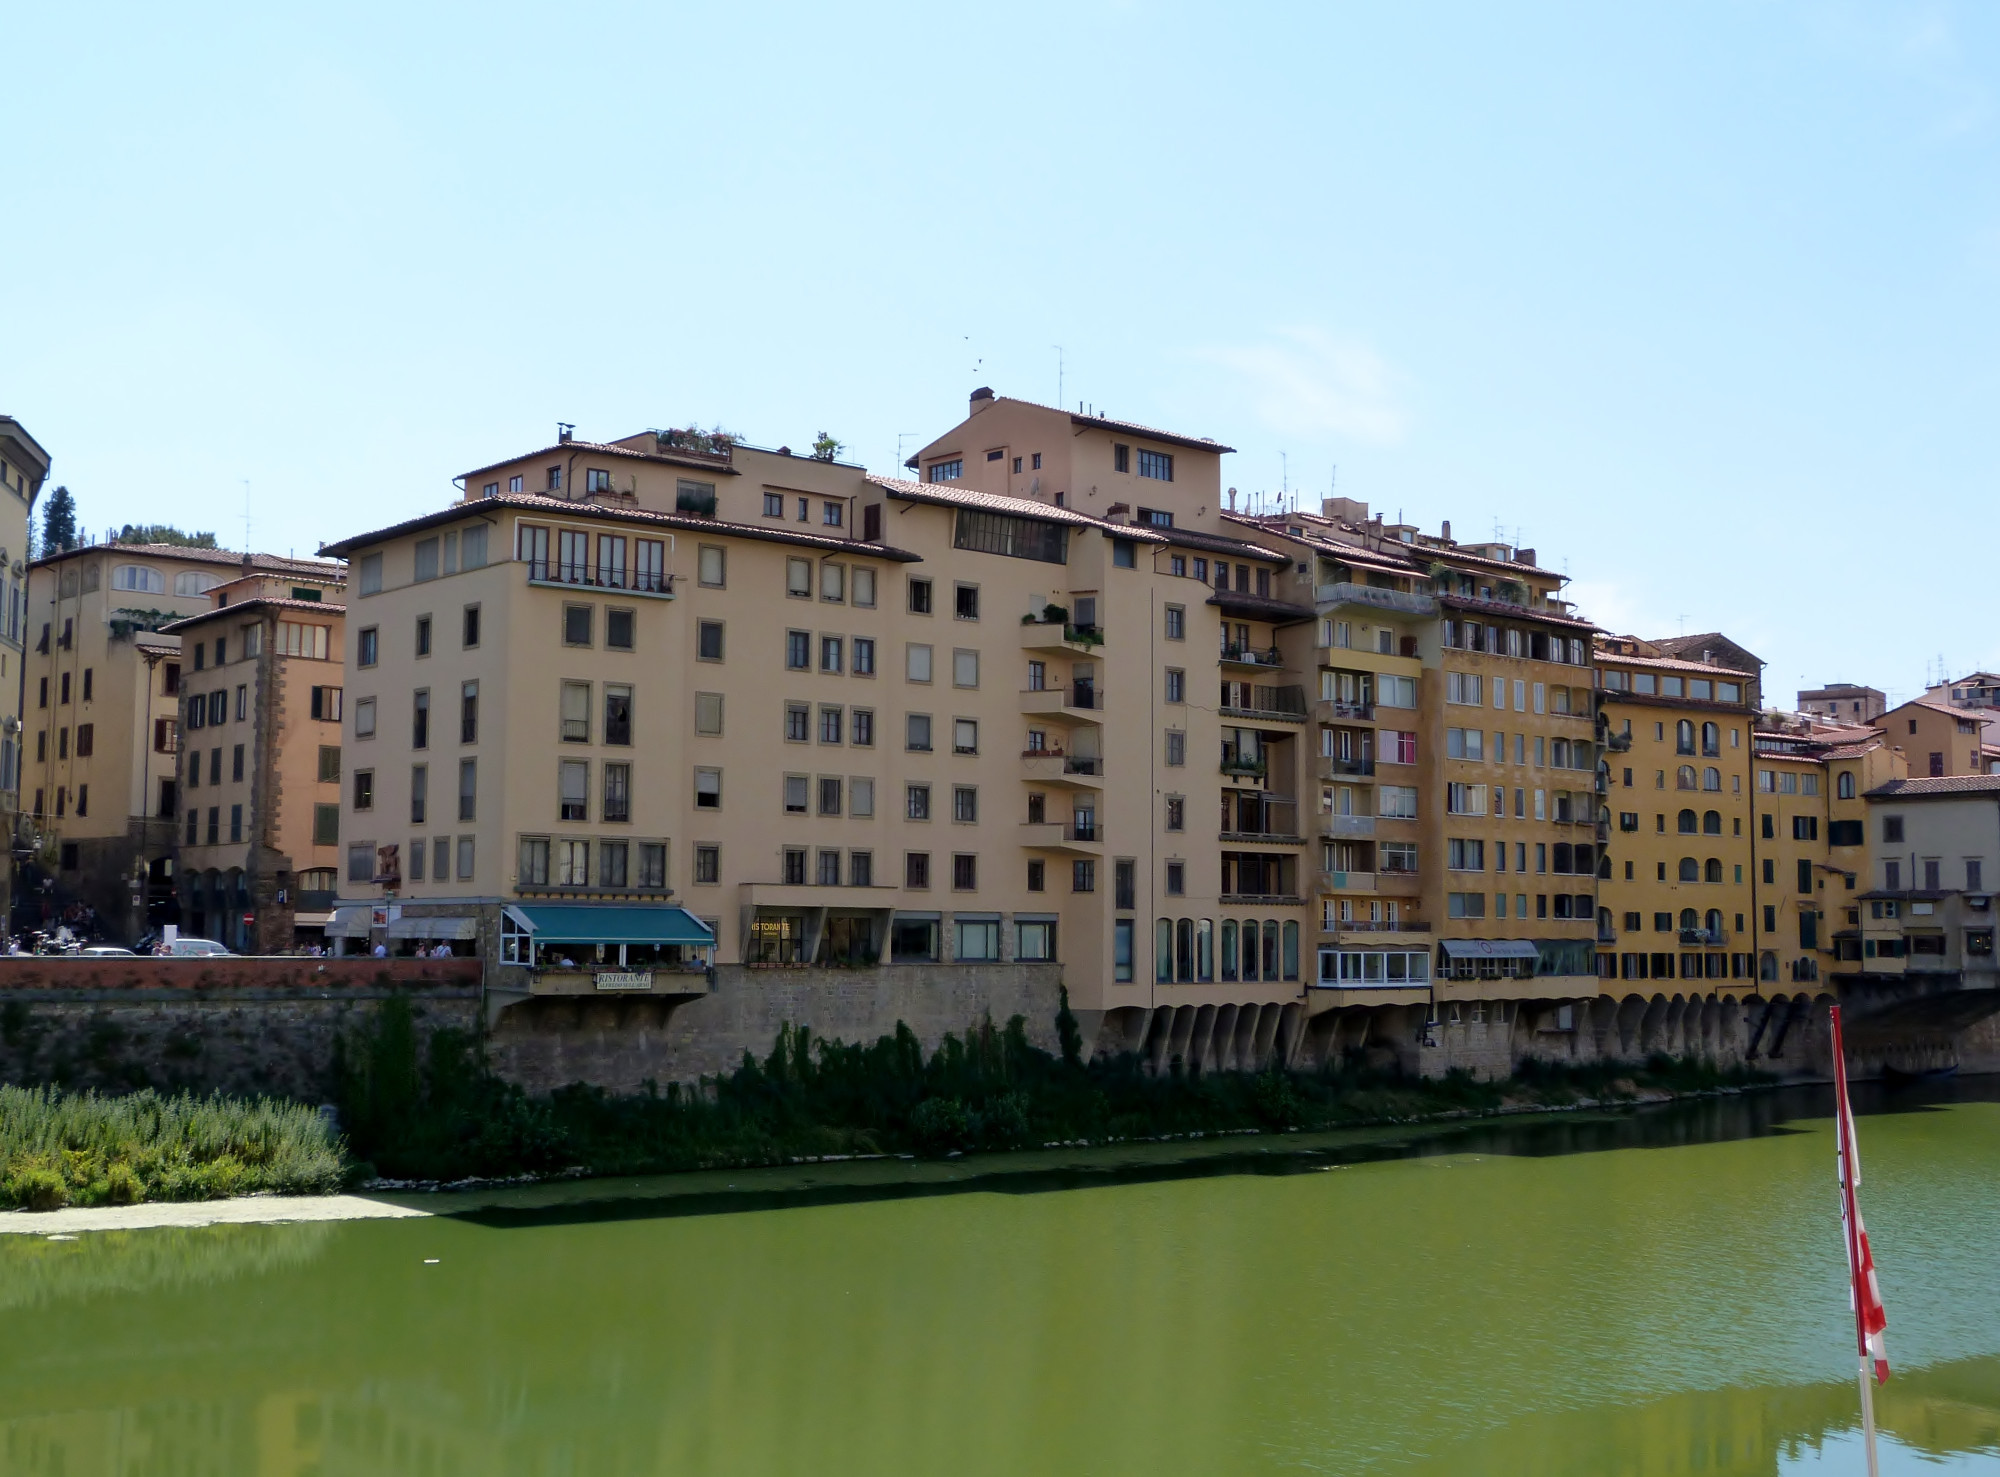 Italy Houses-at-Arno-River-